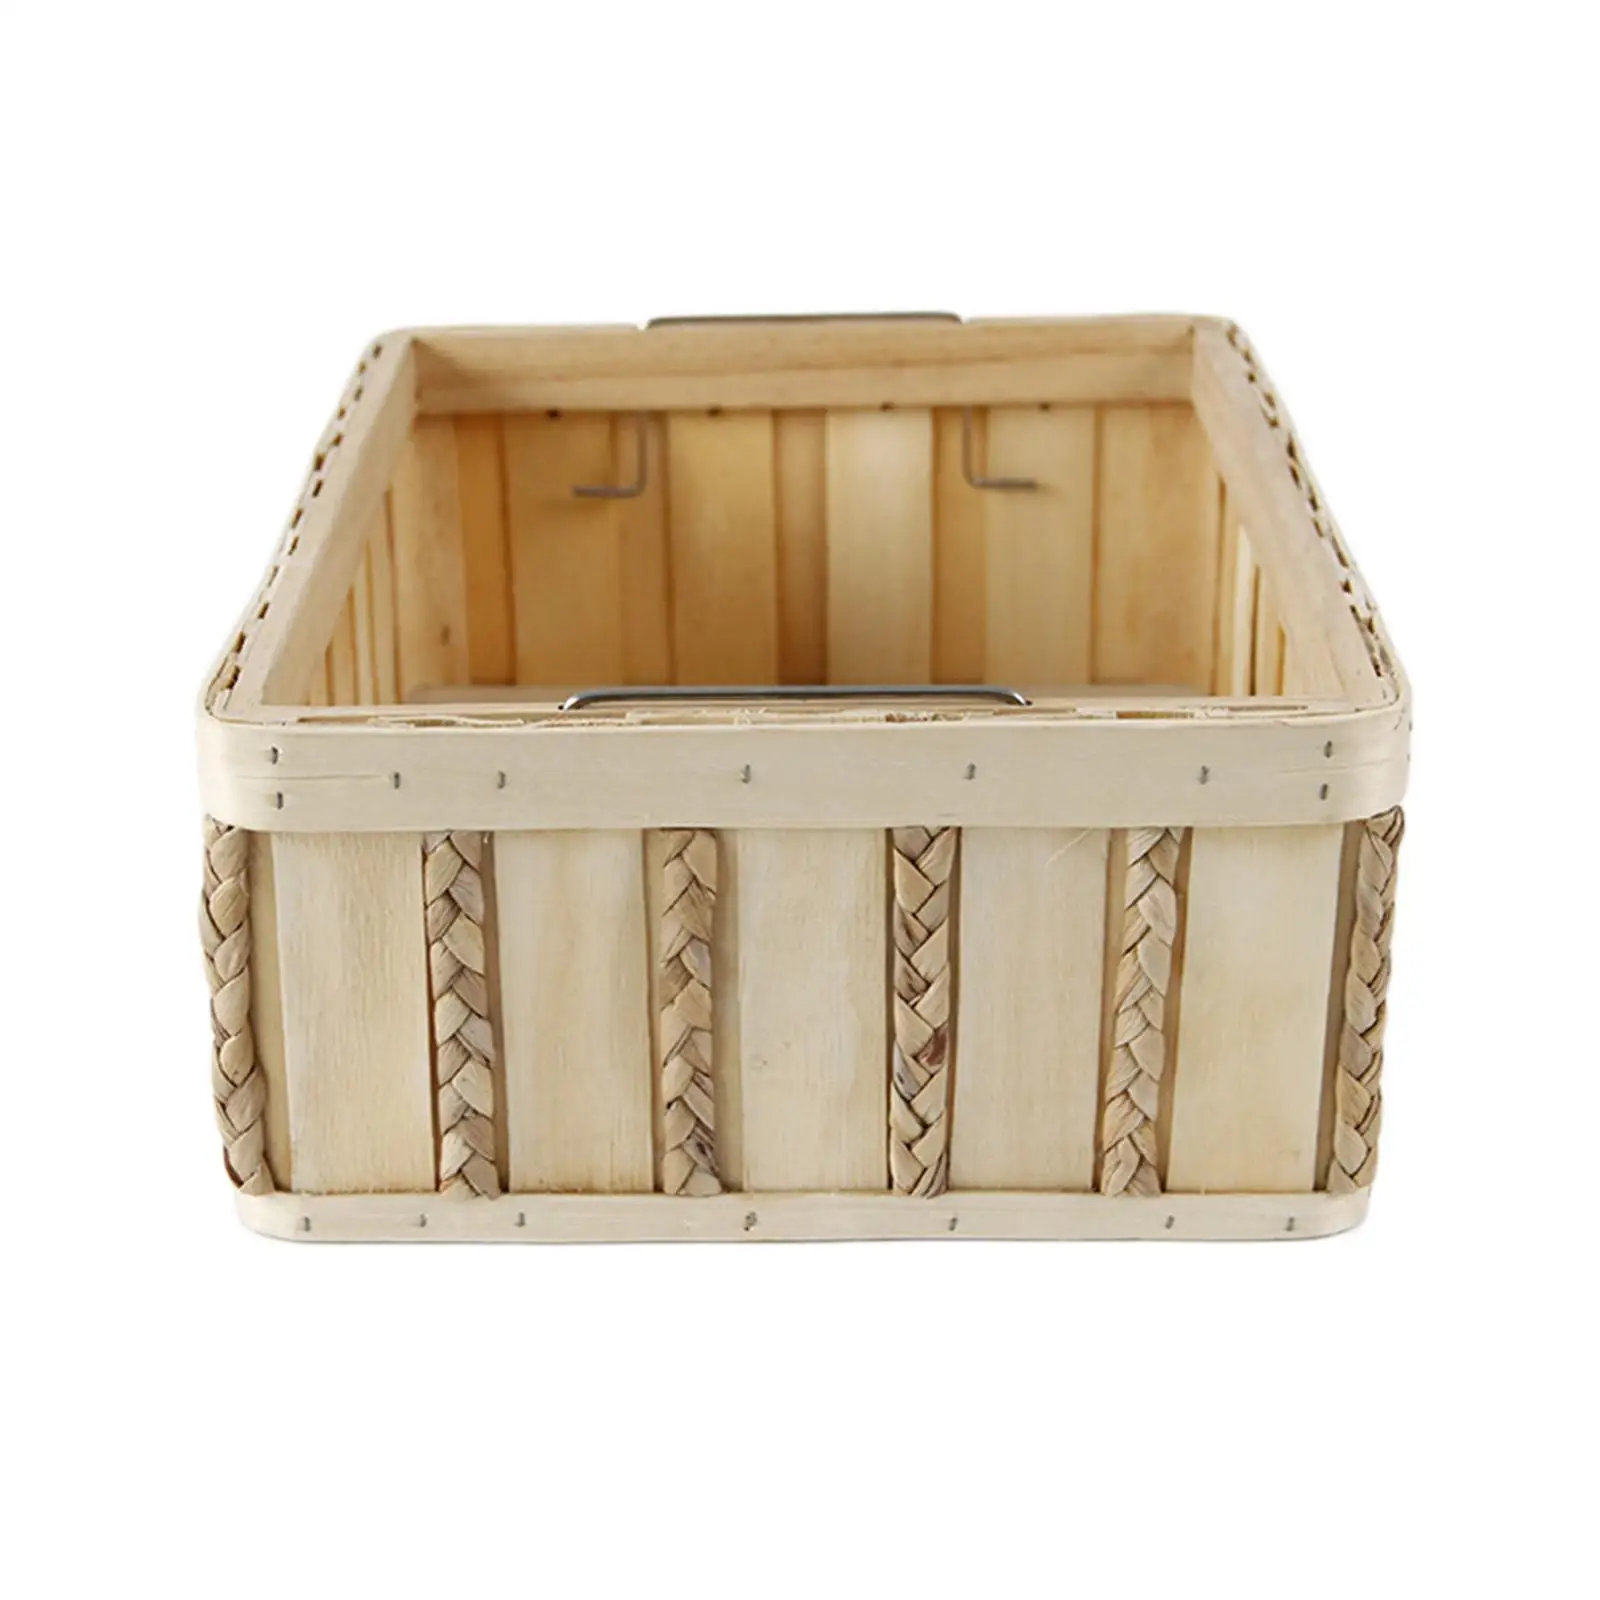 Wooden Storage Box with Handle Household Items Clothing Sundries Container Handmade Rattan Organizer Basket for Bedroom Fitments